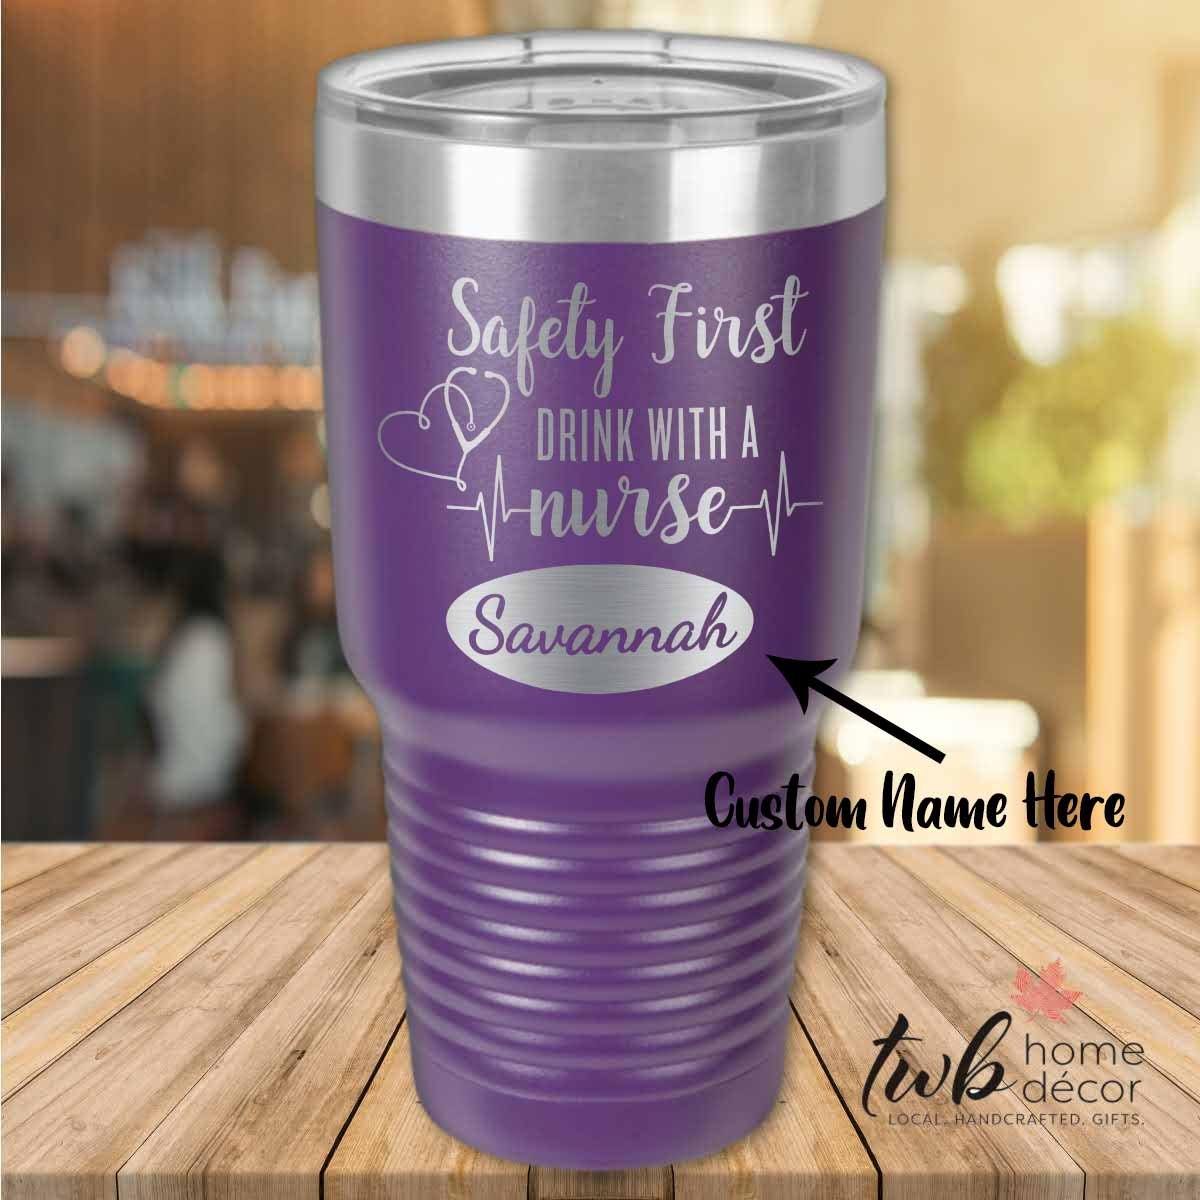 Personalized  Safety First Drink with a Nurse Thermal - TWB Home Decor